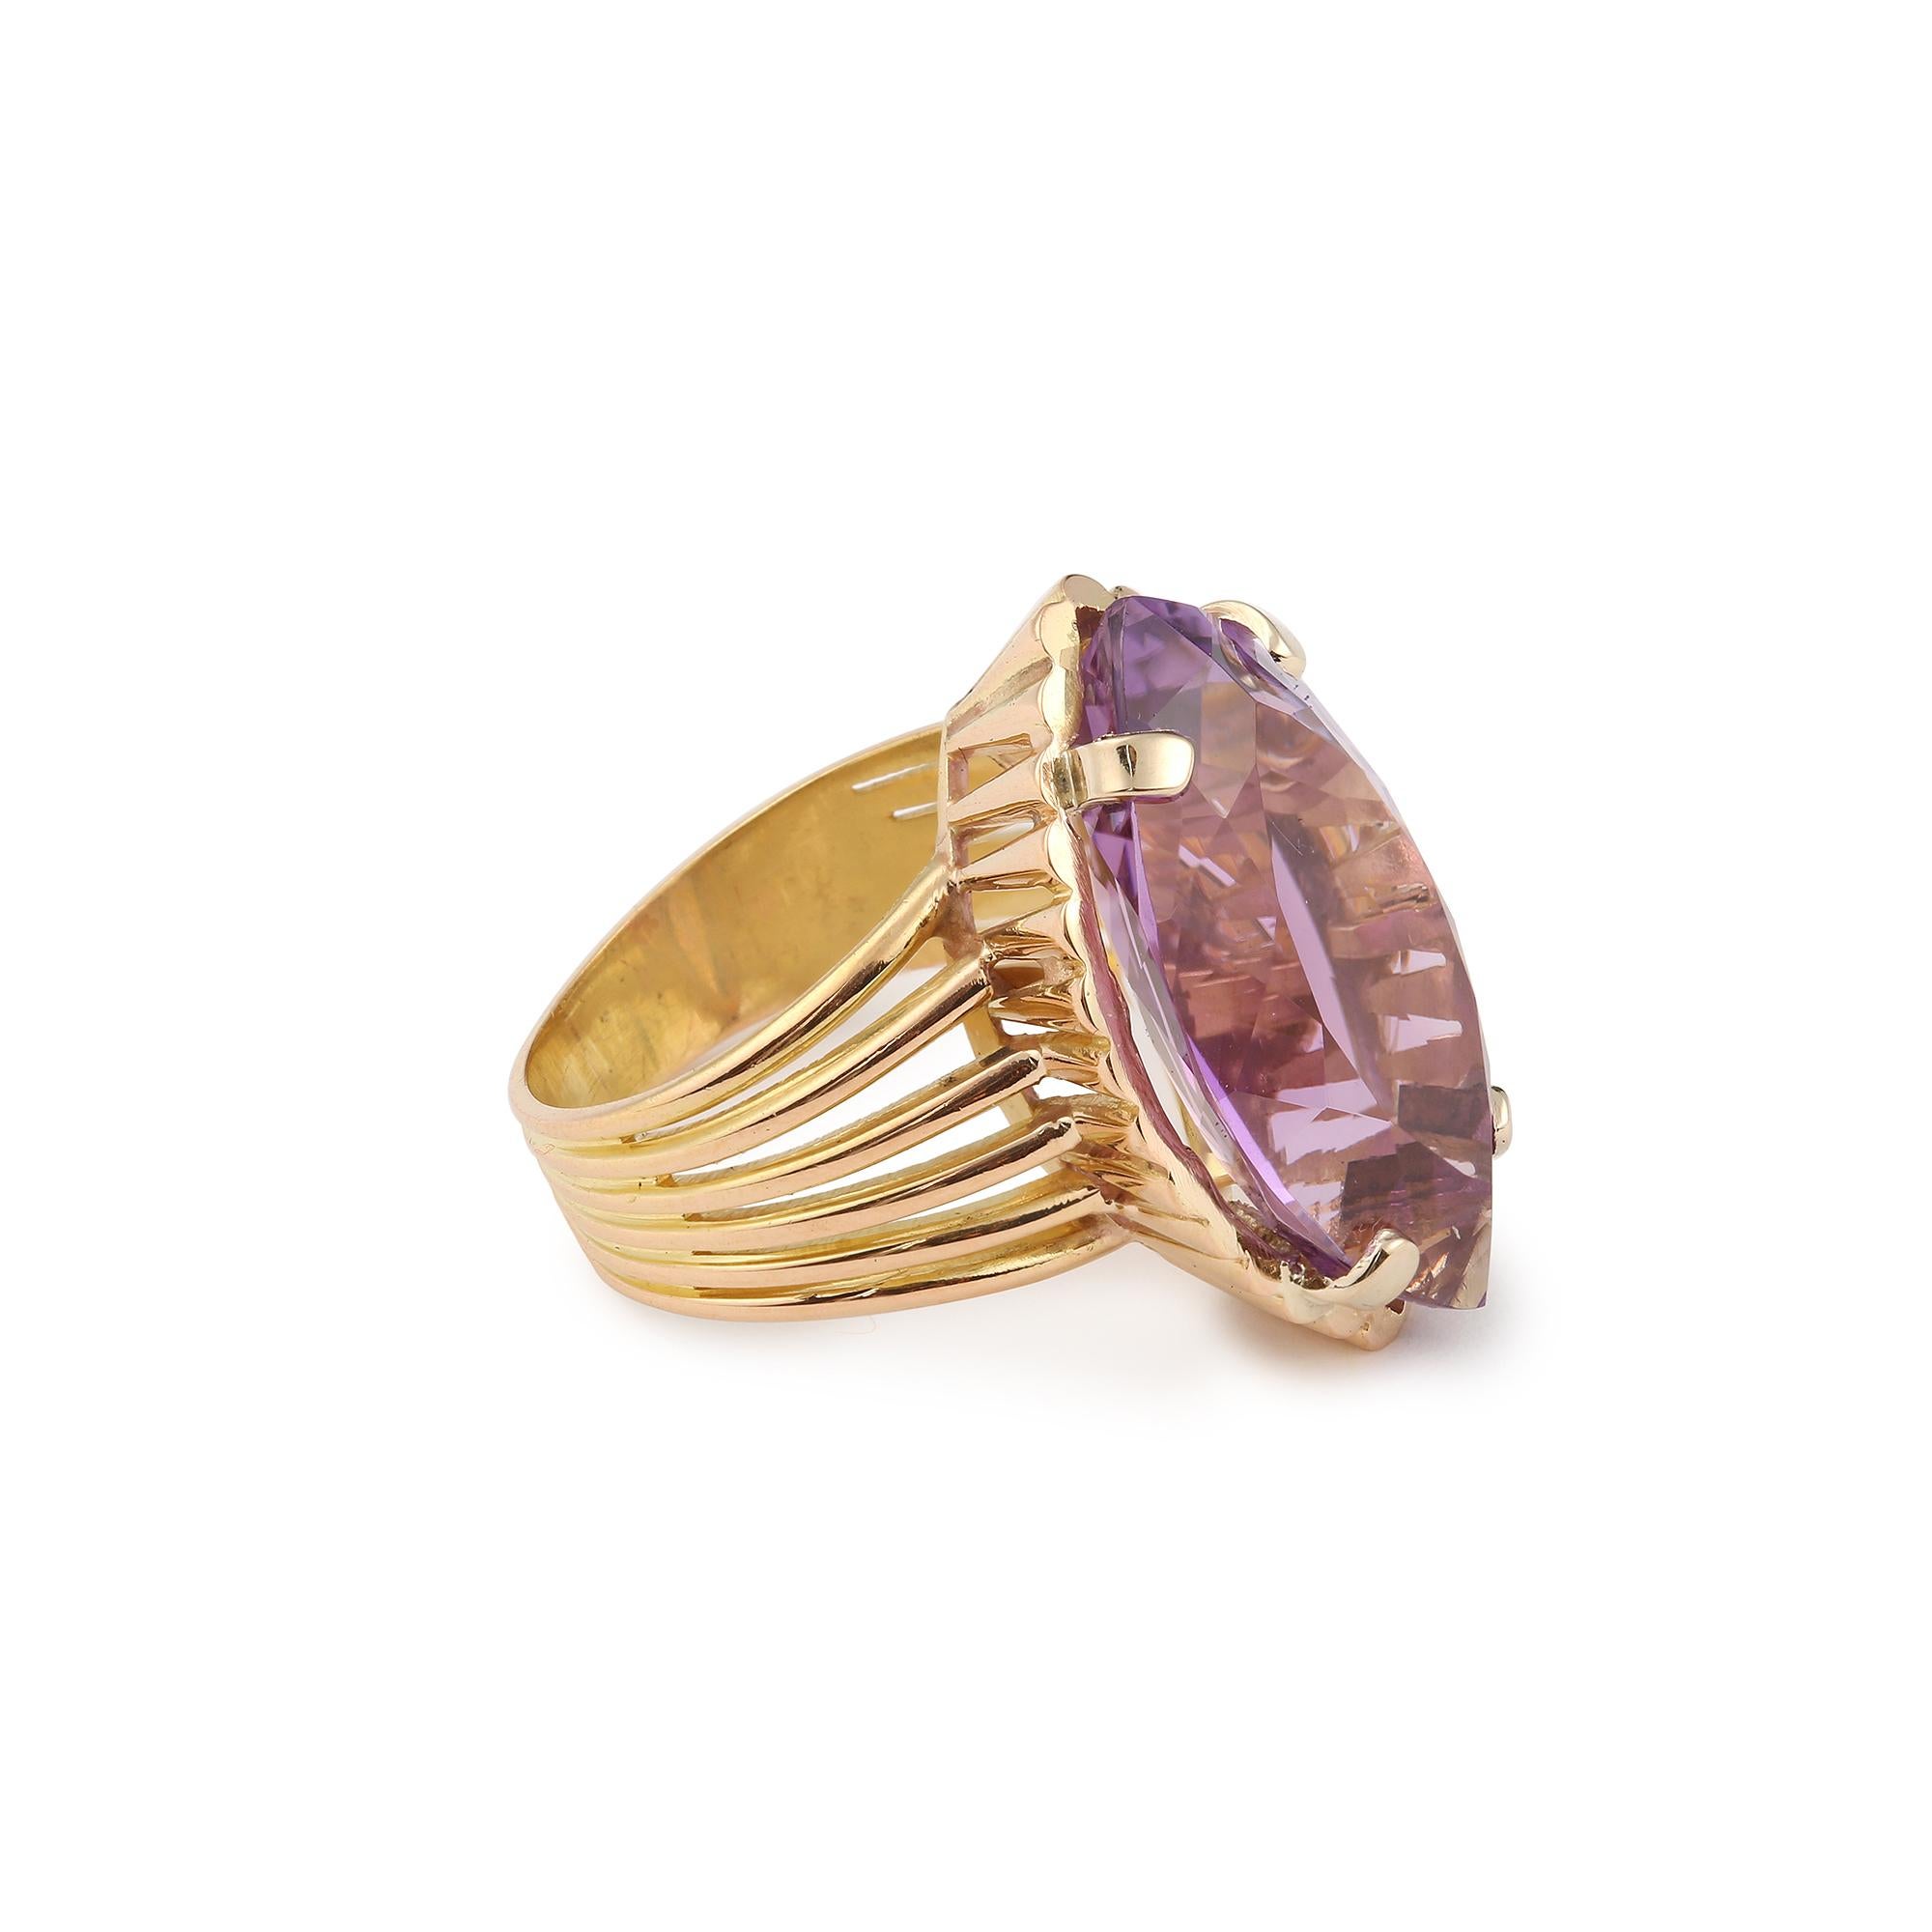 Important yellow gold cocktail ring set with a beautiful marquise-shaped amethyst.

Estimated weight of the gem : 12 carats

Dimensions: 24.40 x 15.35 x 9.91 mm (0.960 x 0.605 x 0.390 inch)

Finger size: 52 (US size: 6)

18K yellow gold, 750/1000th